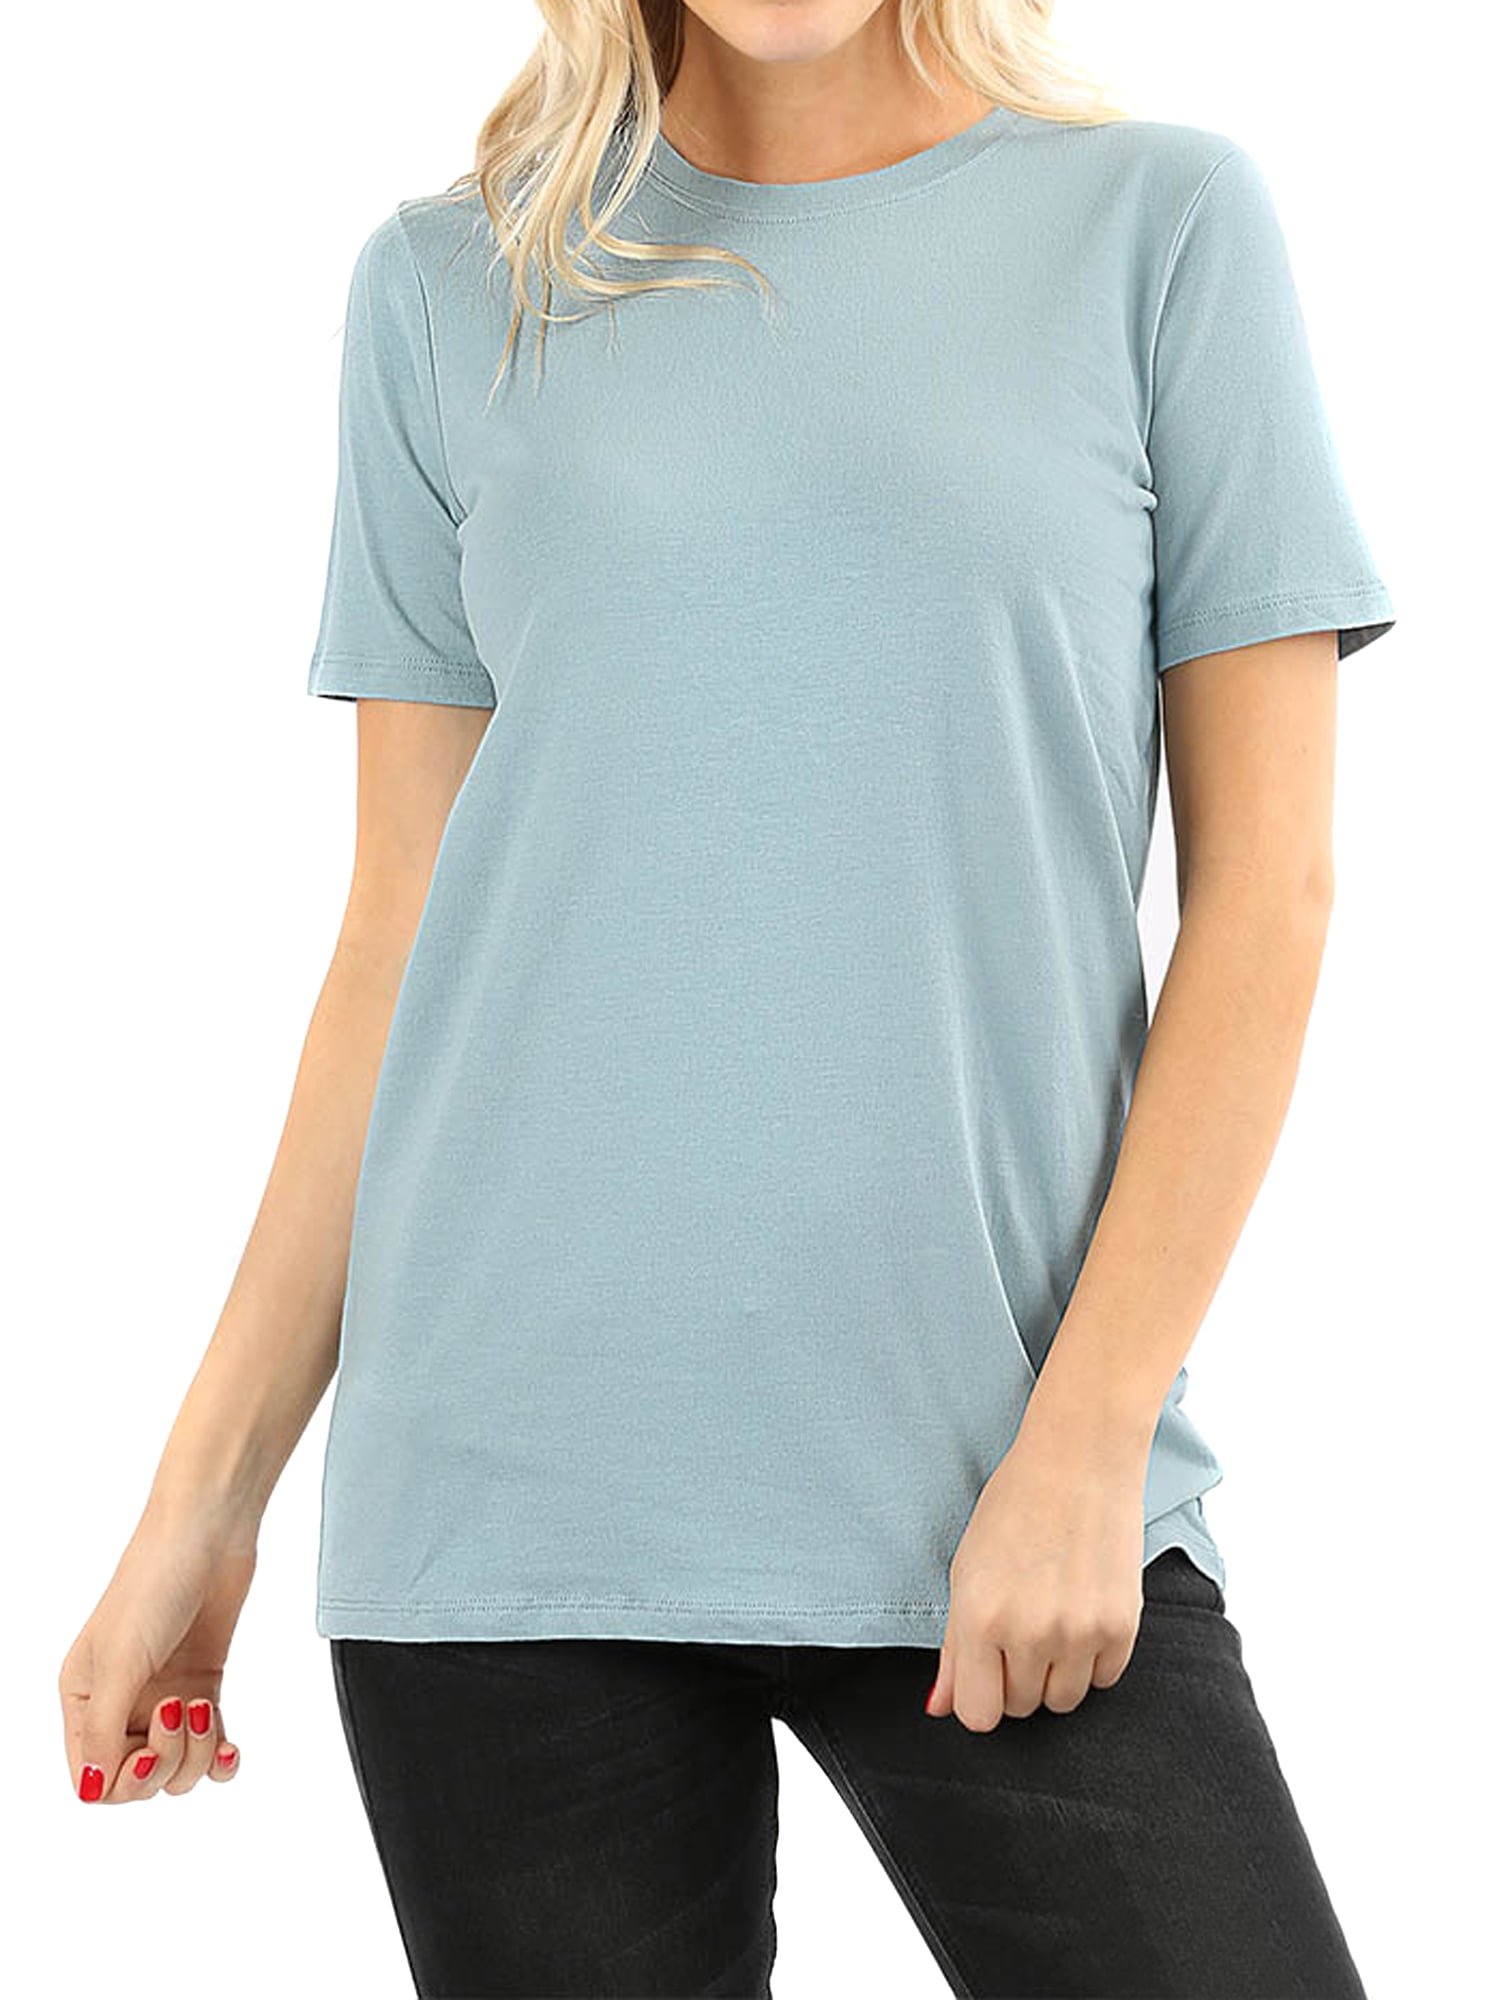 Women's Cotton Crew Neck Short Sleeve Relaxed Fit Basic Tee Shirts ...